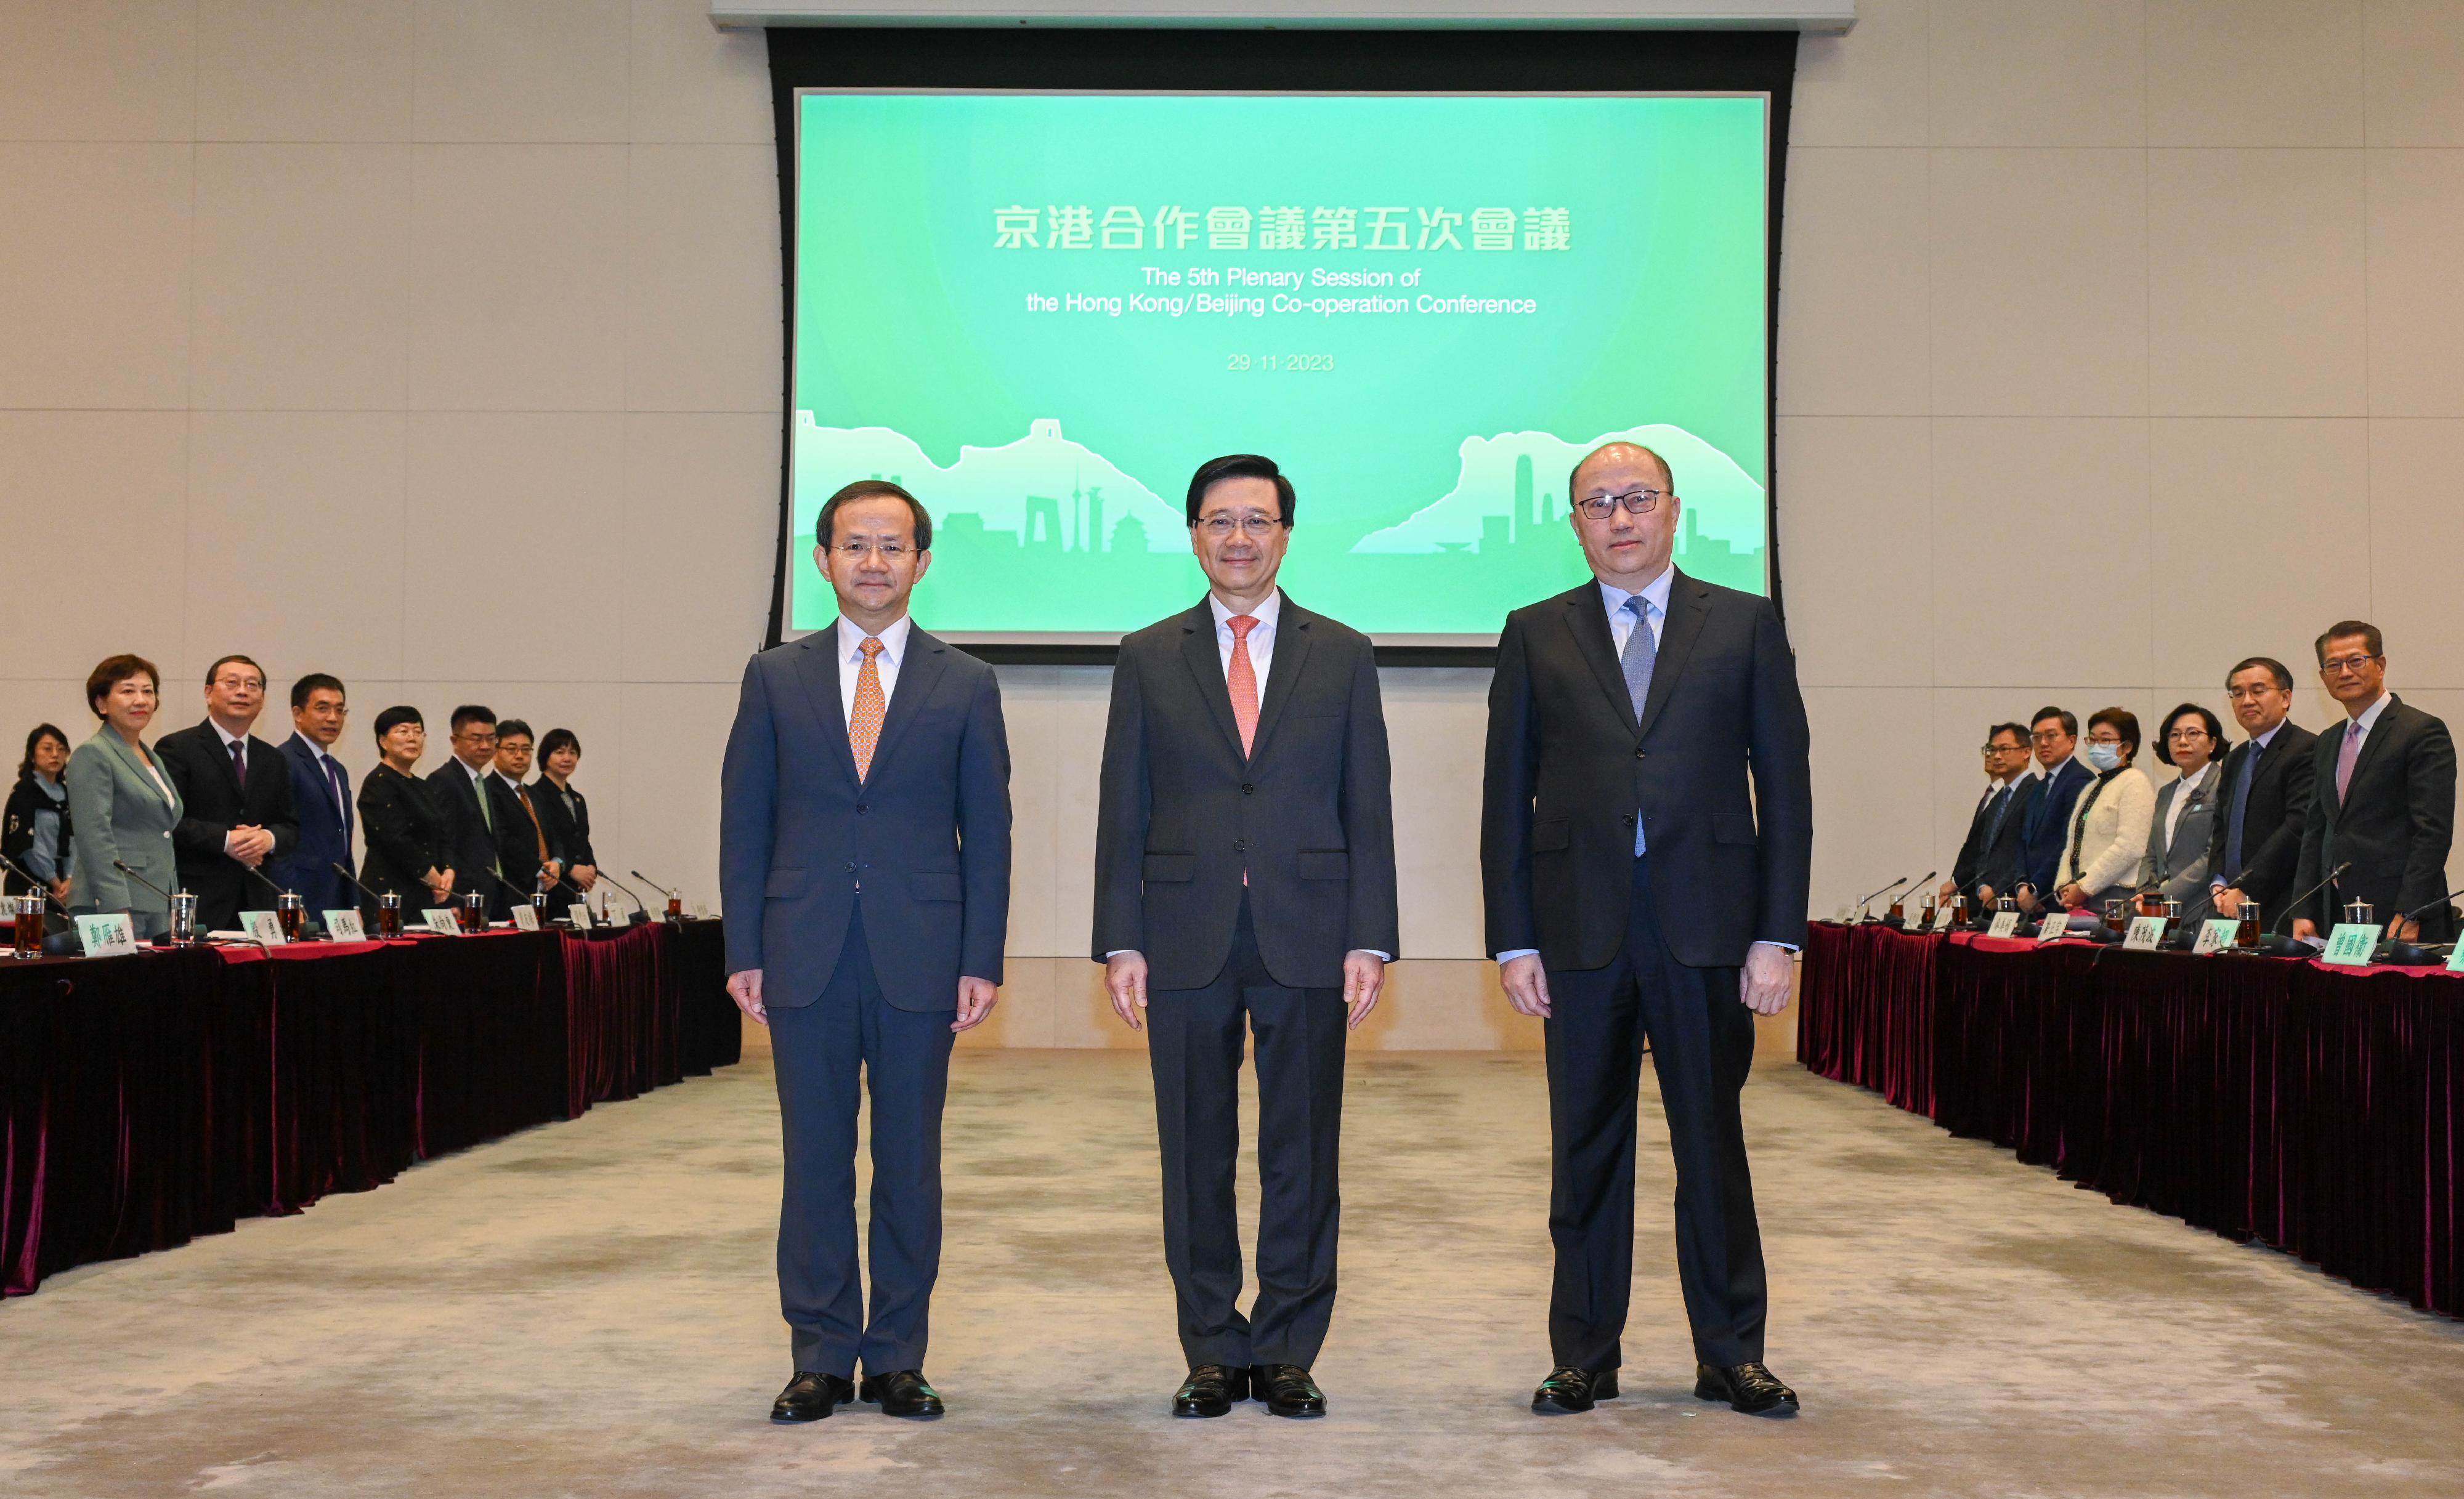 The Chief Executive, Mr John Lee (centre), and the Mayor of Beijing, Mr Yin Yong (left), leading the delegations of the governments of Hong Kong Special Administrative Region (HKSAR) and Beijing respectively, held the Fifth Plenary Session of the Hong Kong/Beijing Co-operation Conference in Hong Kong today (November 29). Deputy Director of the Hong Kong and Macao Affairs Office of the State Council, Director of the Liaison Office of the Central People's Government in the HKSAR, Mr Zheng Yanxiong (right), also attended the plenary